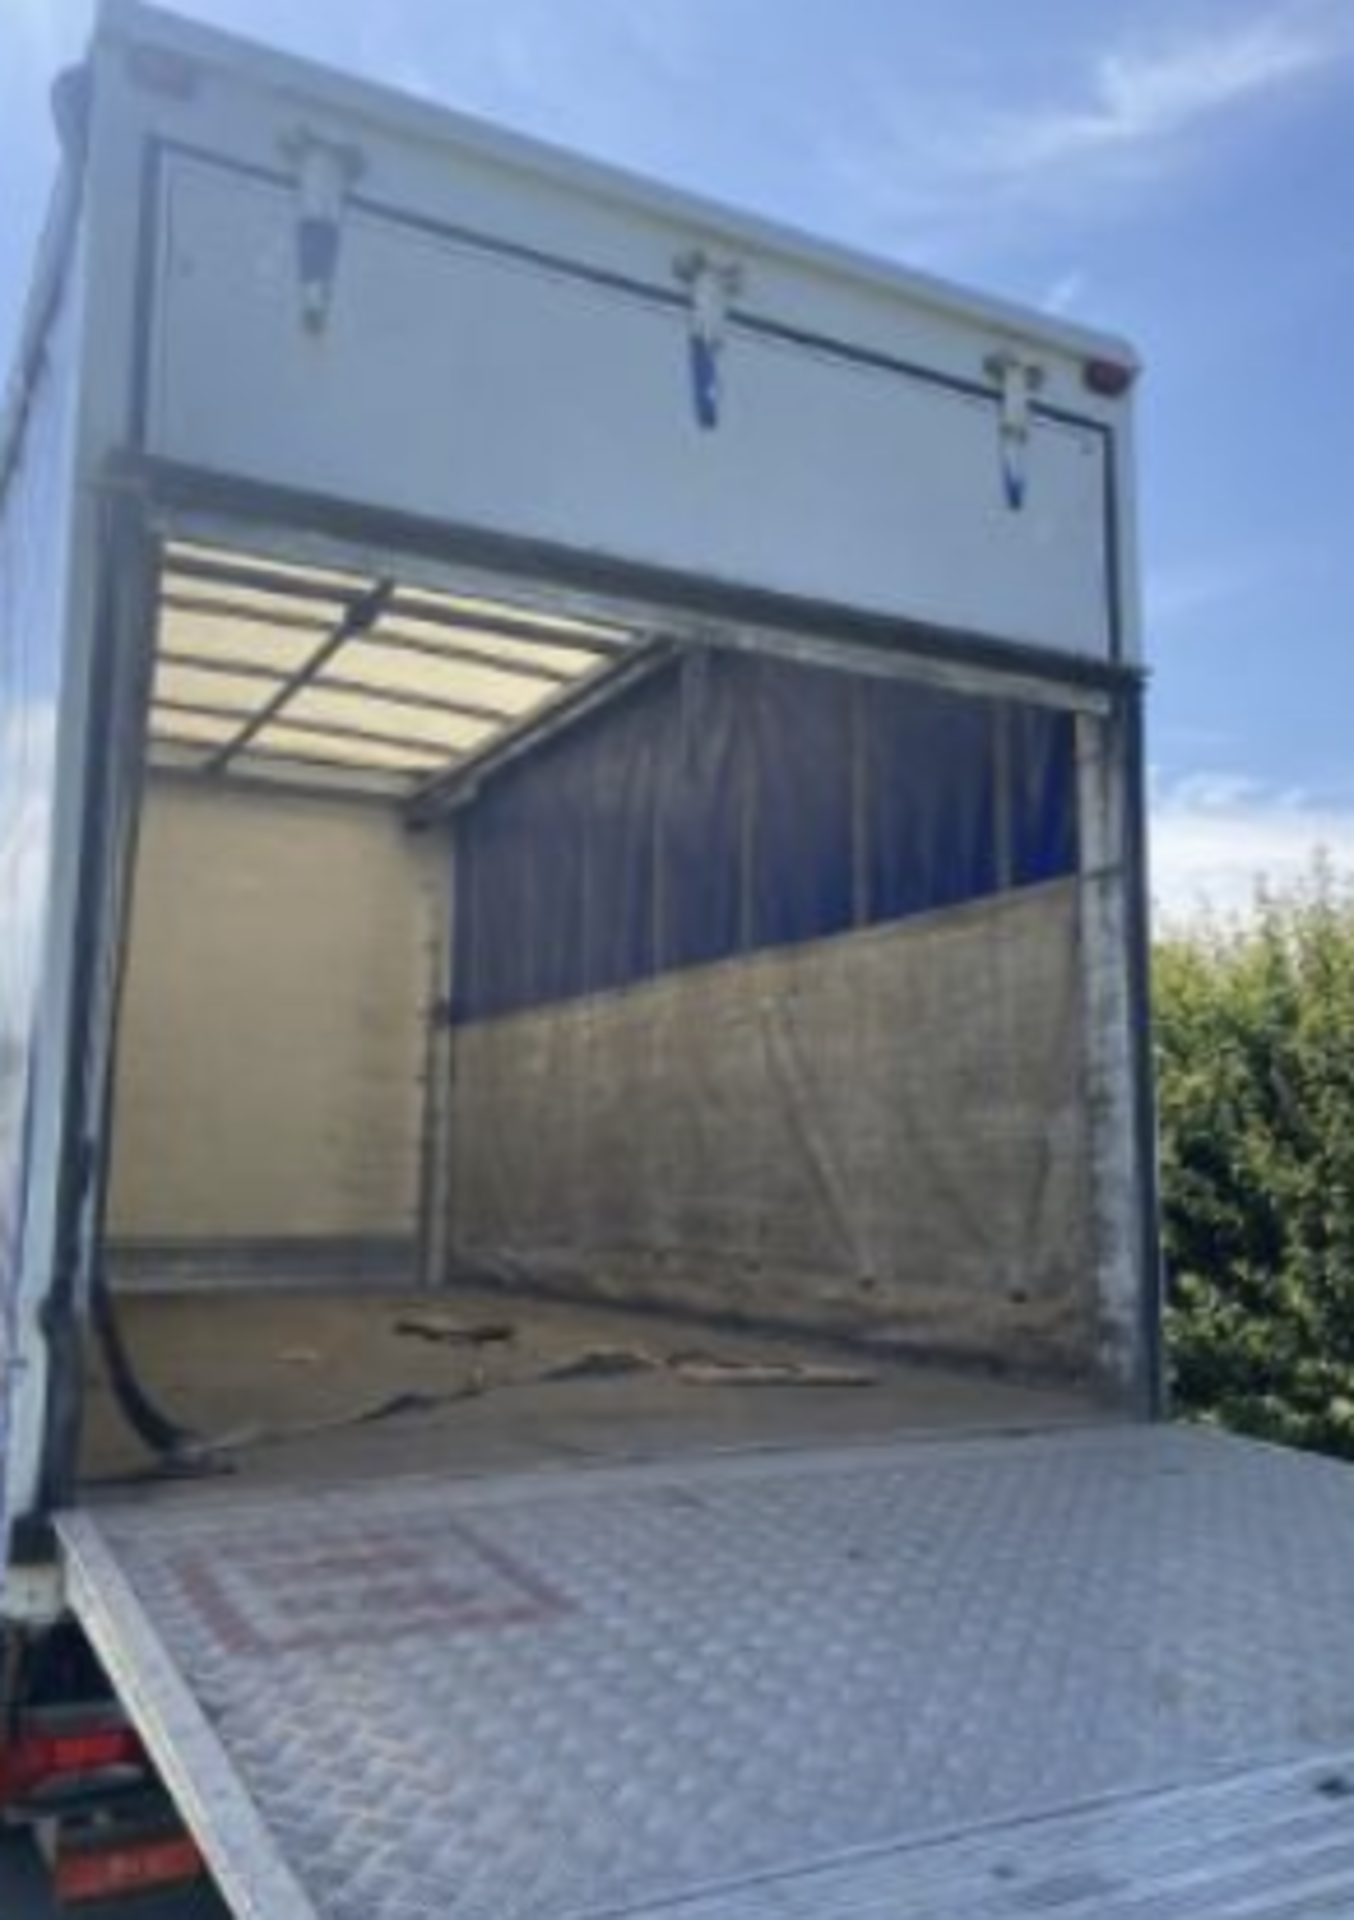 2014 IVECO 70C17 TRUCK CURTAINSIDE AND TAIL LIFT.LOCATION NORTH YORKSHIRE. - Image 3 of 7